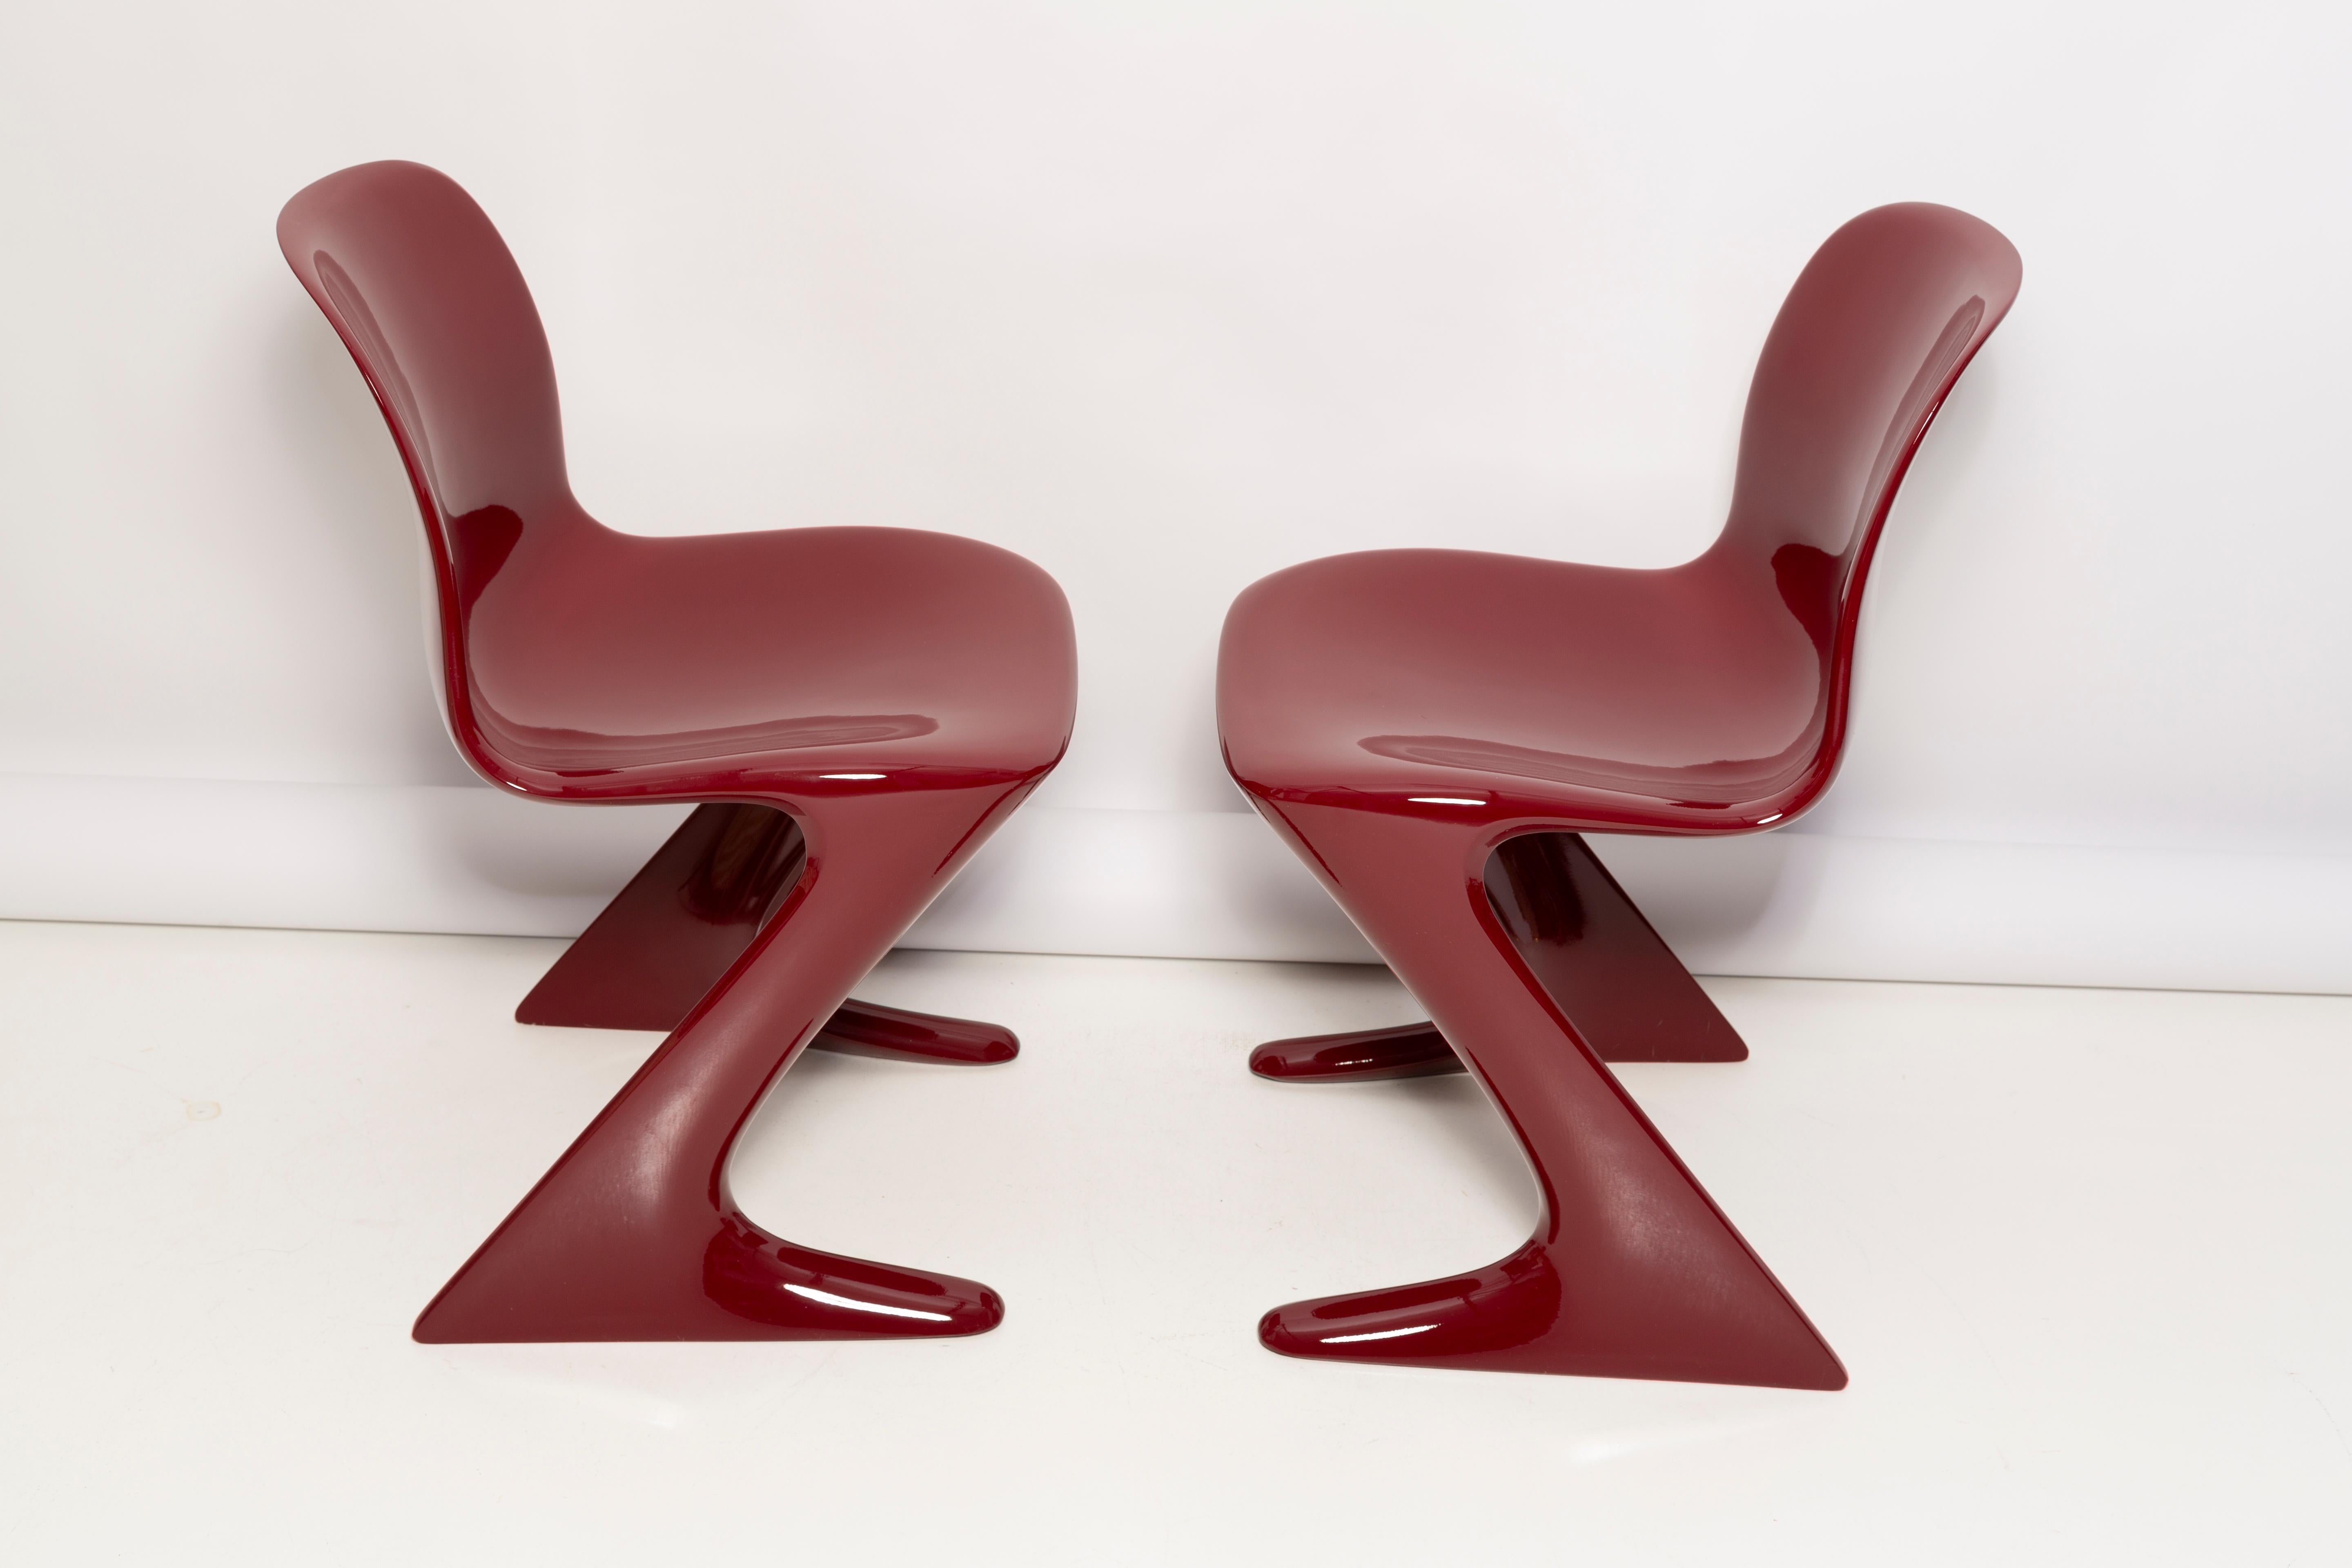 Lacquered Pair of Dark Red Wine Kangaroo Chairs Designed by Ernst Moeckl, Germany, 1968 For Sale